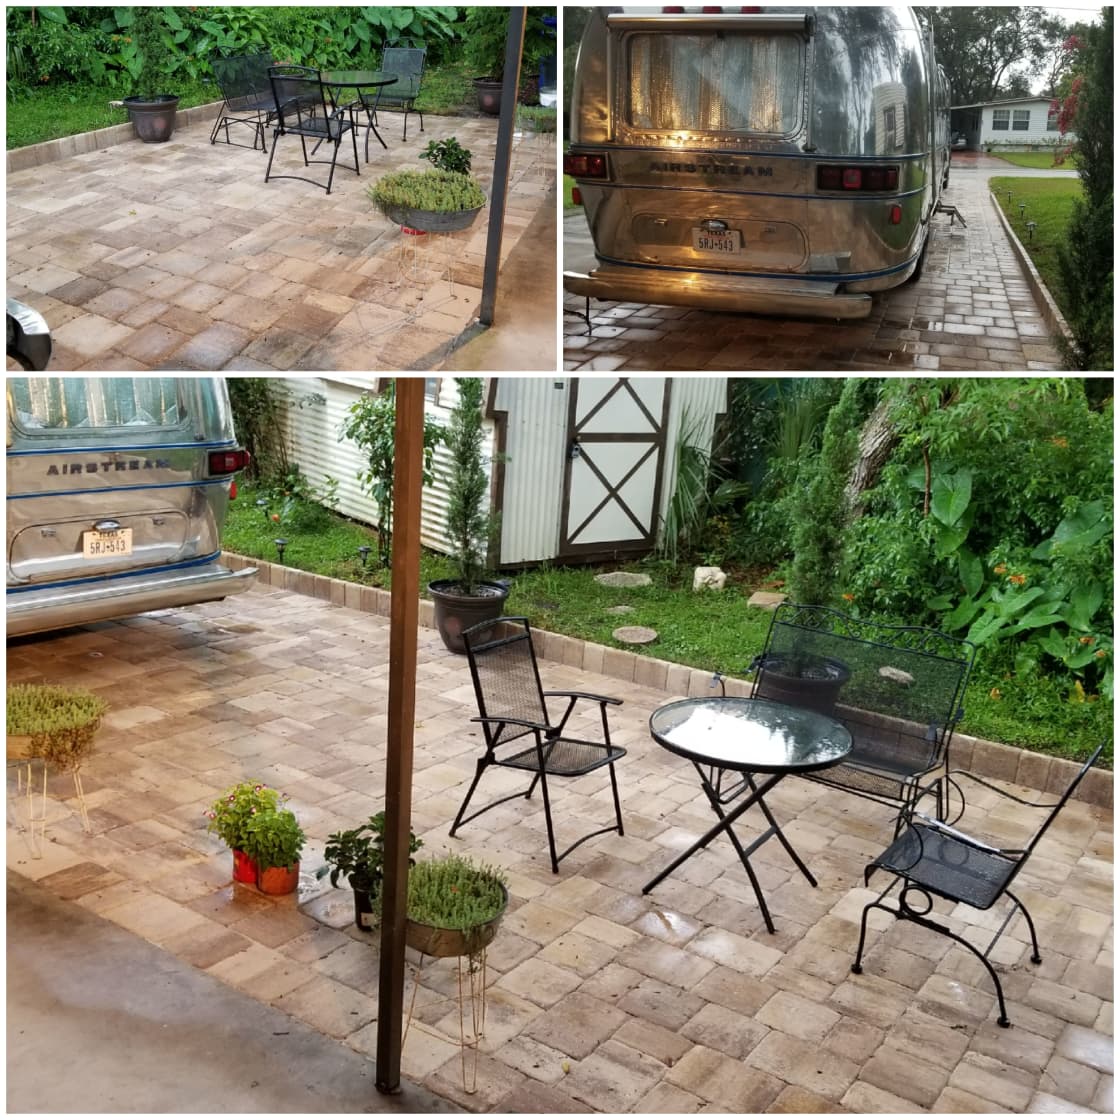 Private patio for your use on level pavers with 30/50 amp electric, grey water drainage, water,  high speed internet and streaming tv.